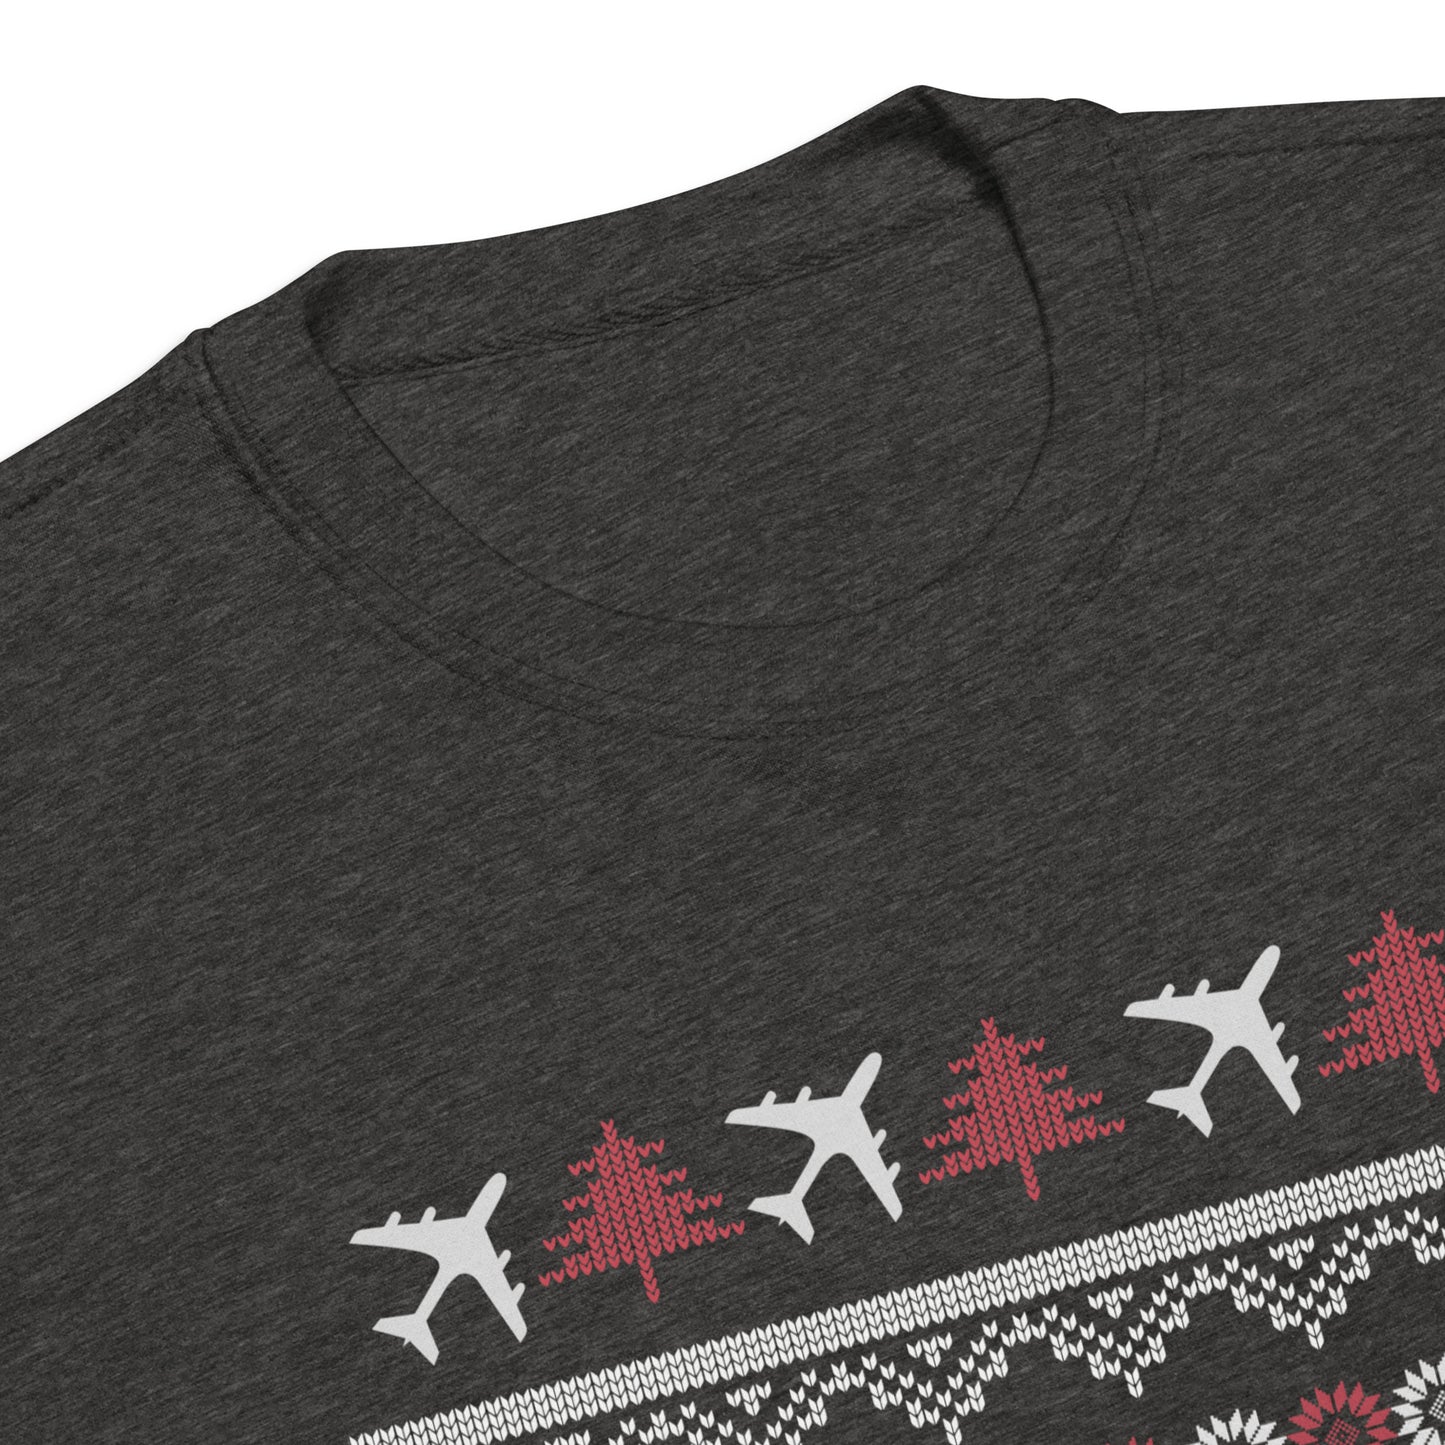 Ugly Christmas Sweater by Passenger Shaming - UNISEX - Charcoal